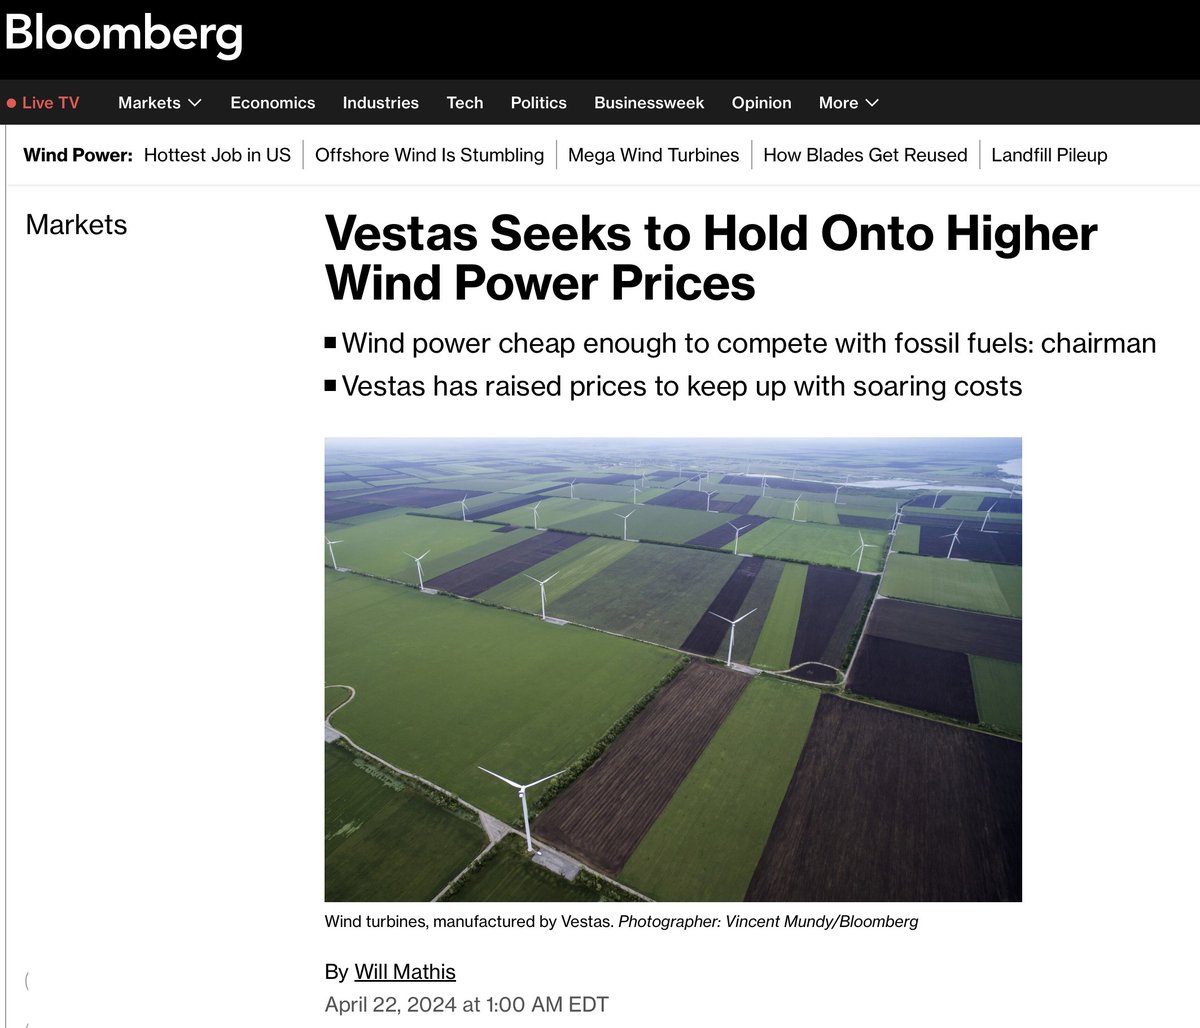 We've been lied to for decades about 'green energy' reducing electricity costs: One of the world’s biggest wind turbine makers wants to hold onto recent price gains — rather than pass on savings — as it bids to bolster earnings. bloomberg.com/news/articles/…